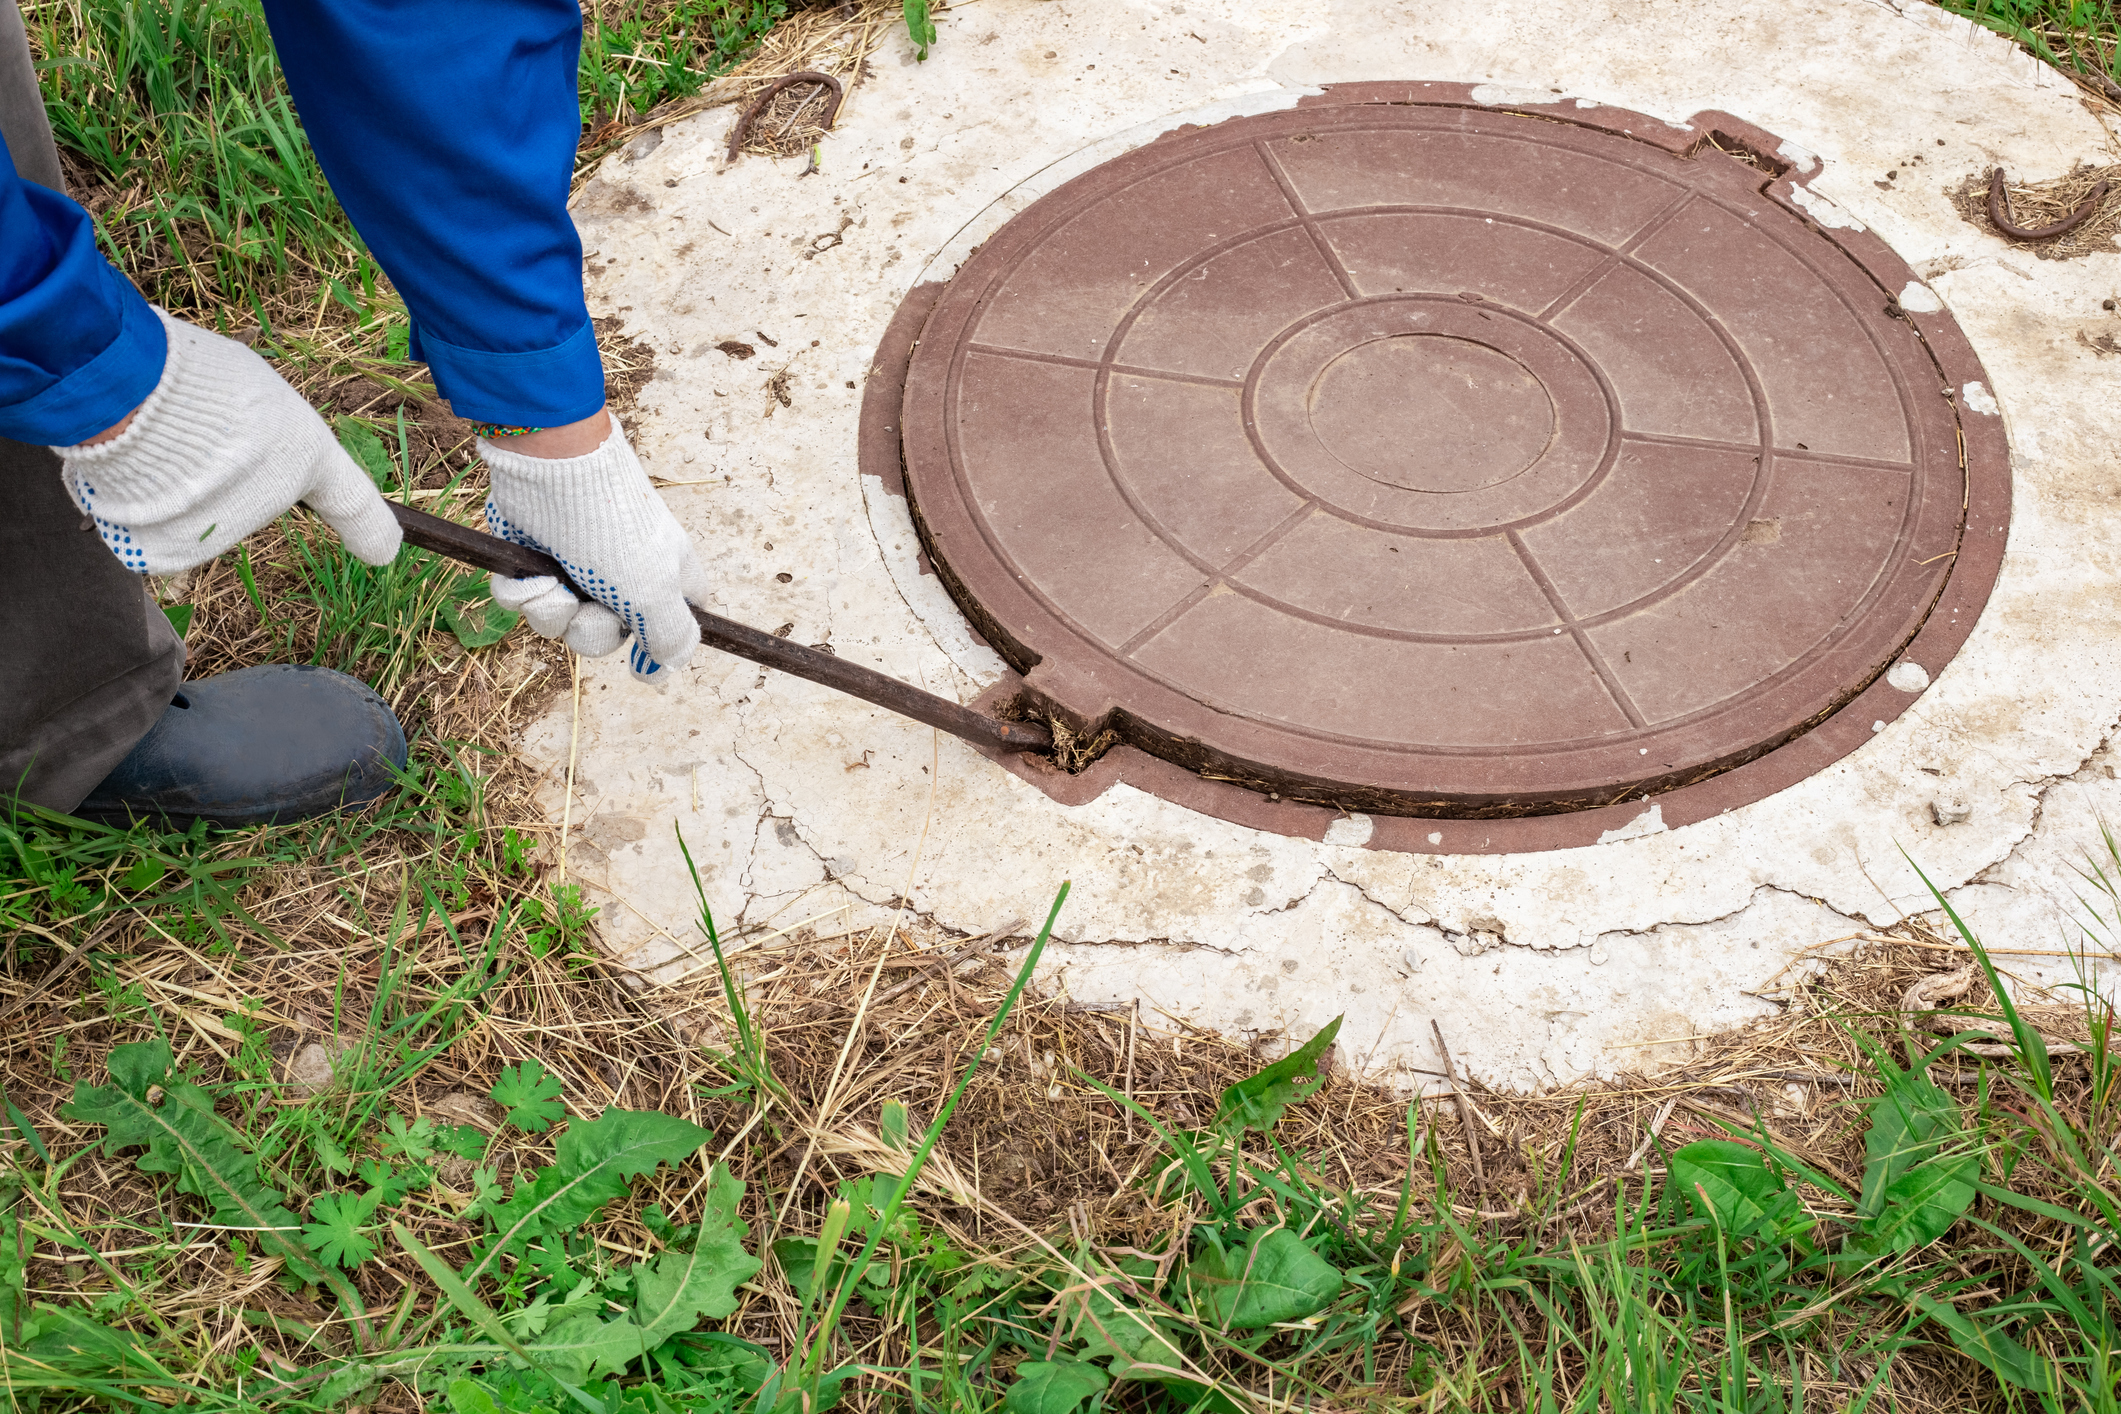 the worker opens the manhole cover to inspect and check the equipment